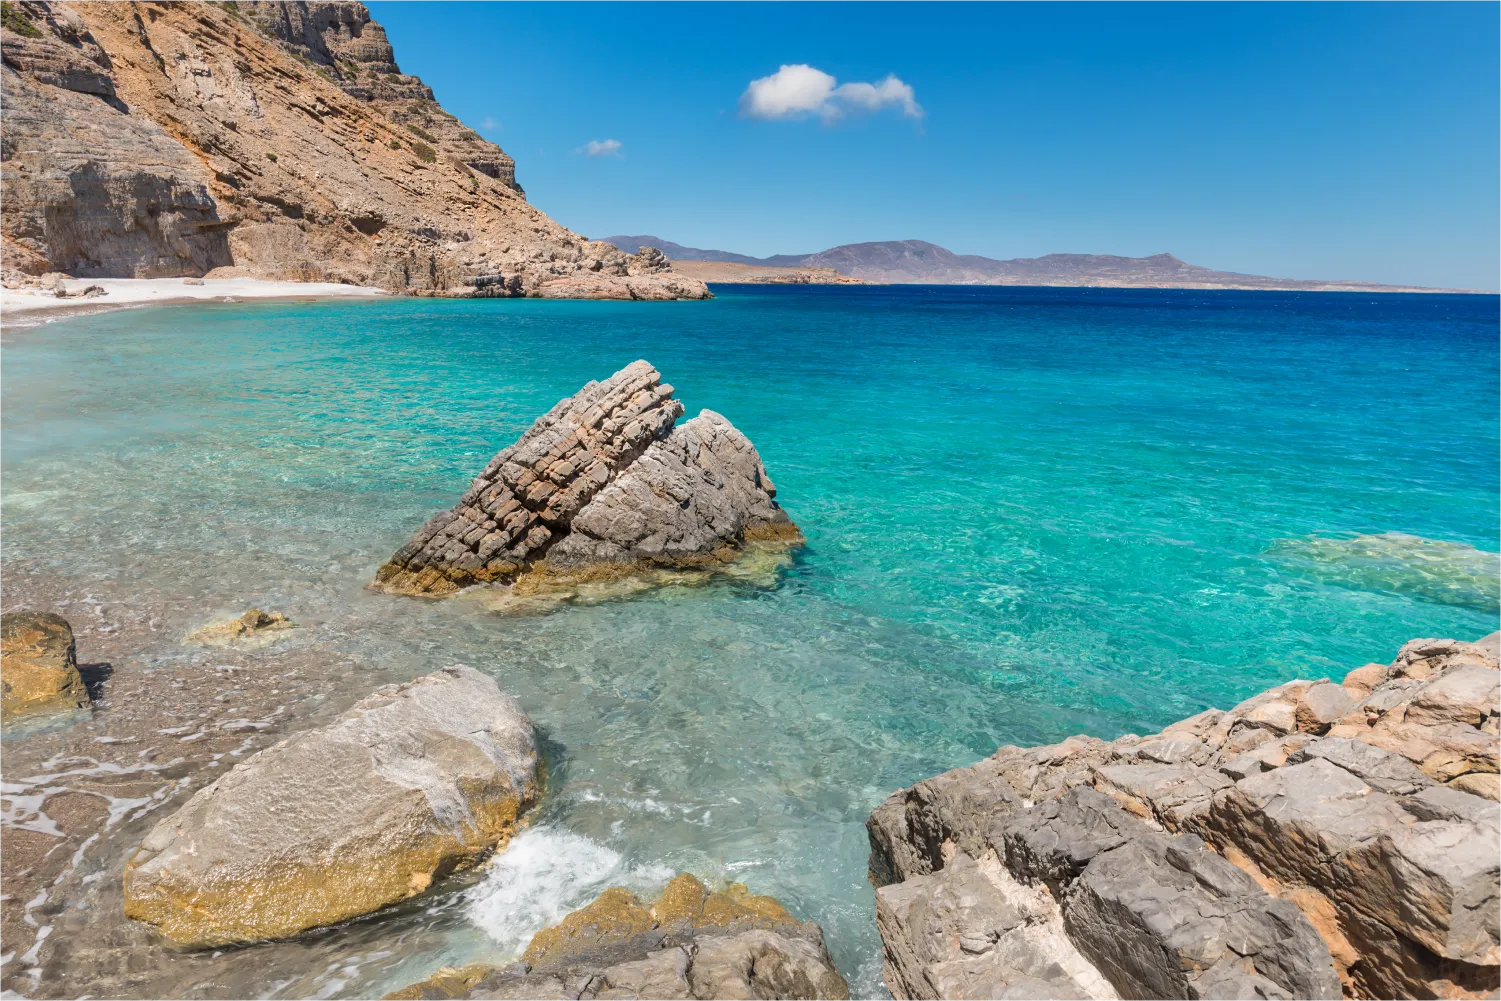 Beach At The Base Of The Rocky Walls Of The South Coast Of The Greek Island Of Kasos